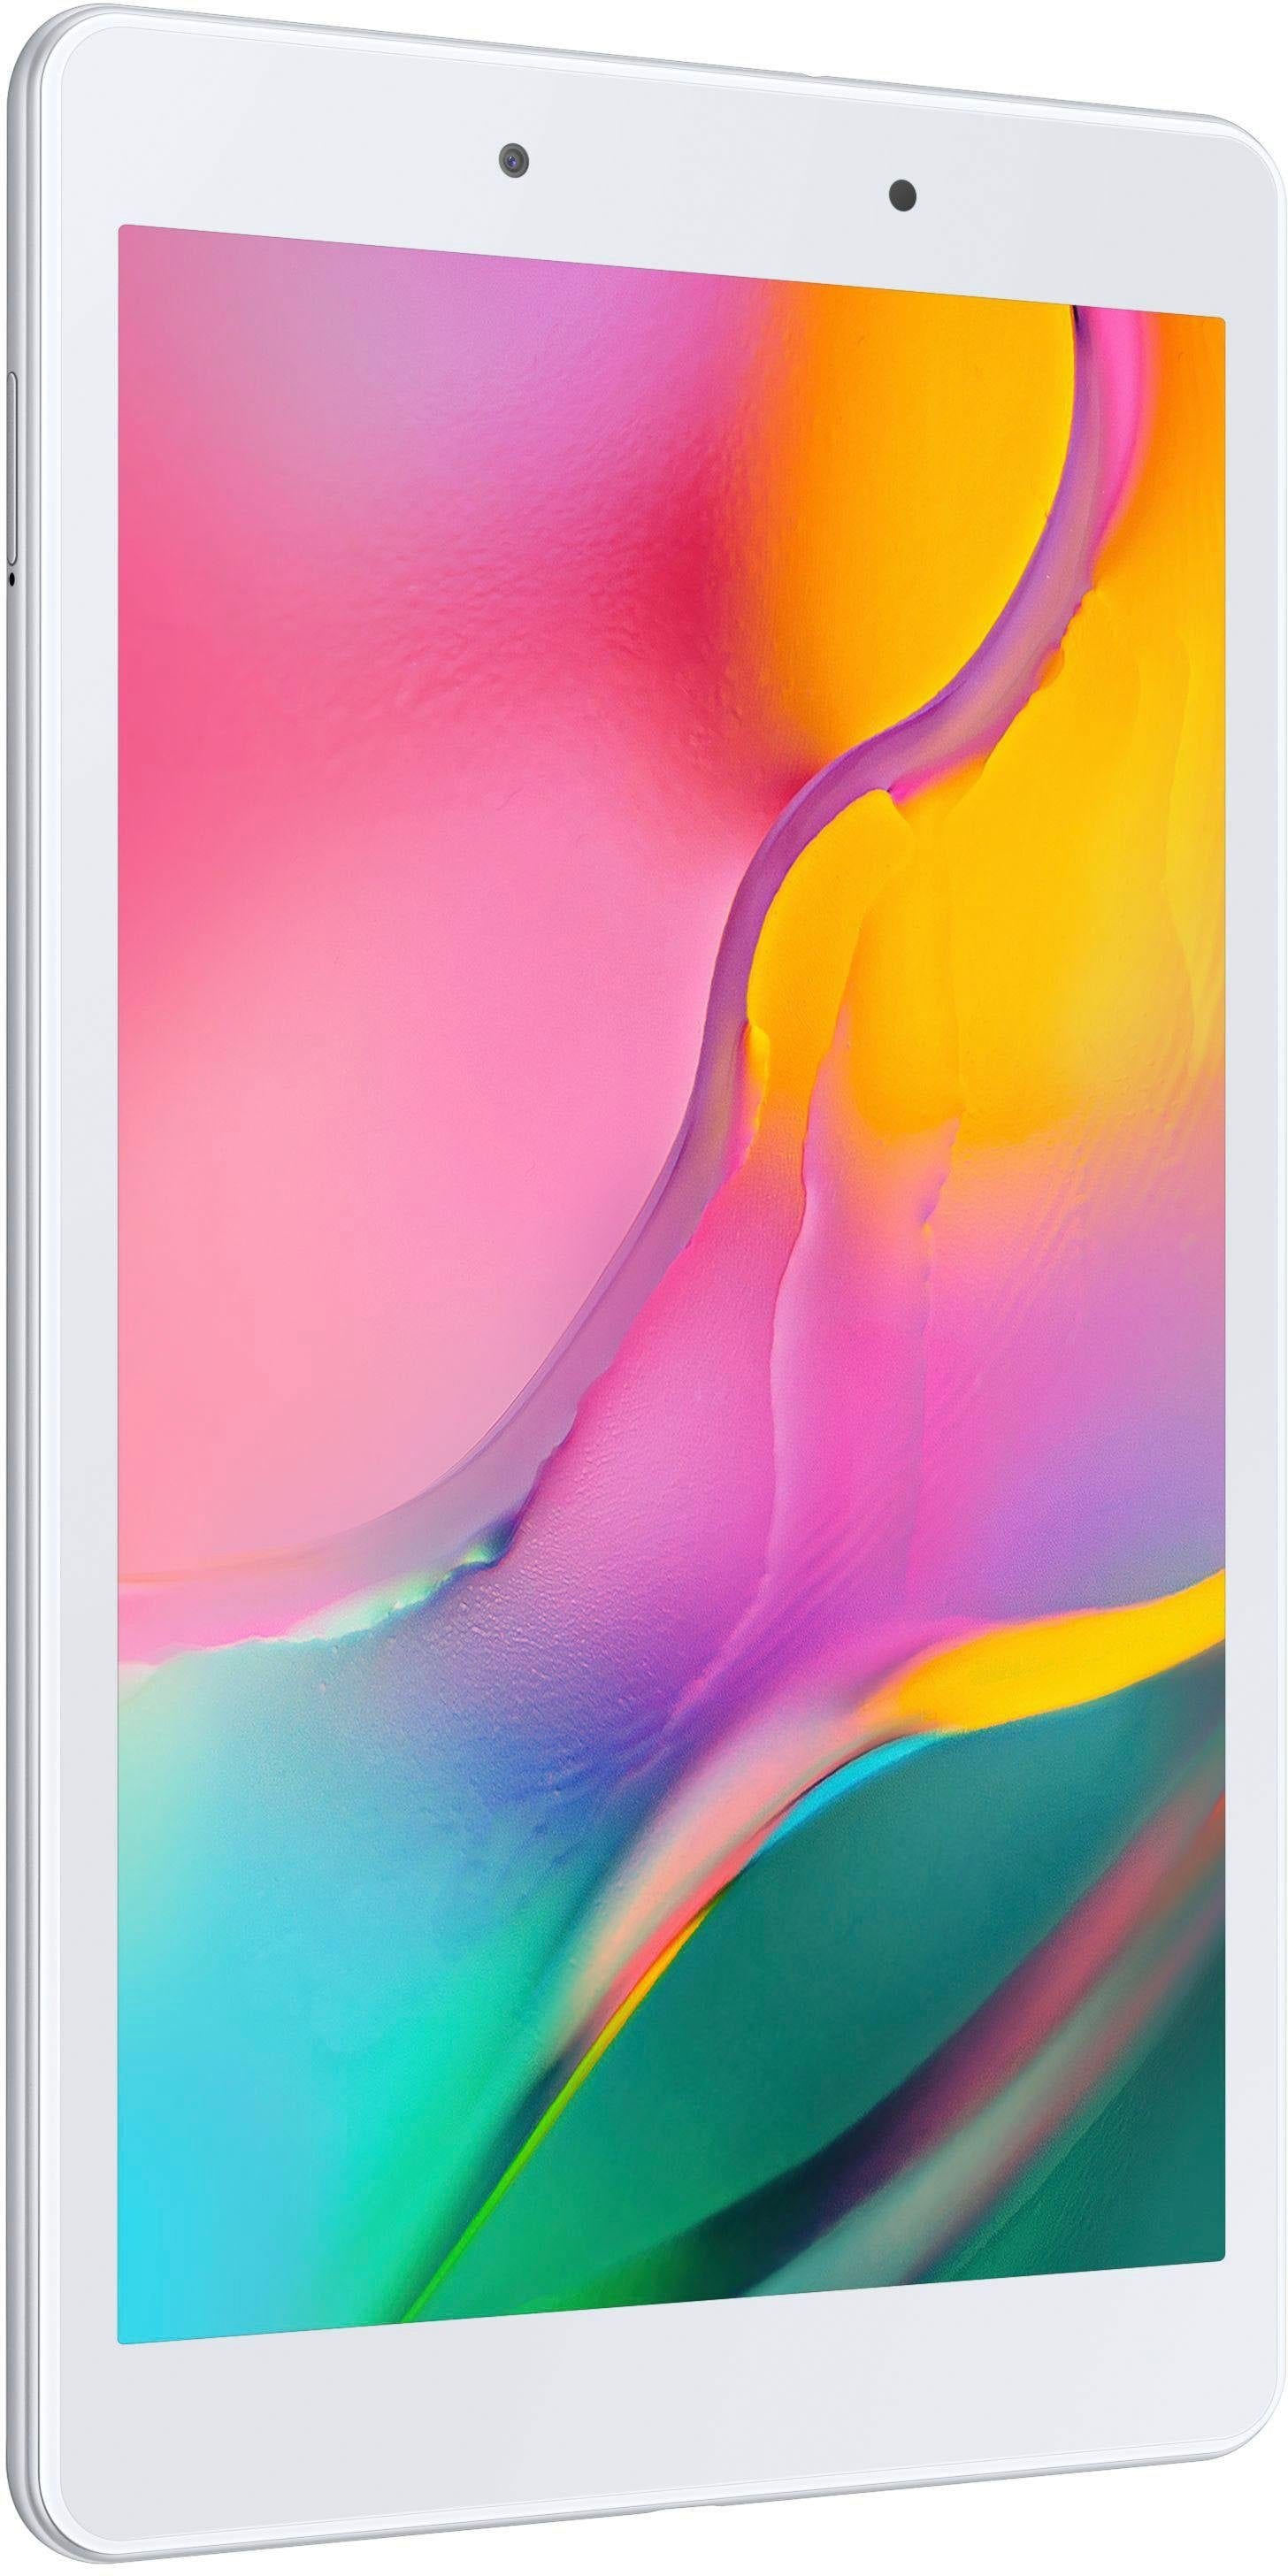 Samsung Tablet »Galaxy Tab A 8.0 Wi-Fi (2019)«, (Android)